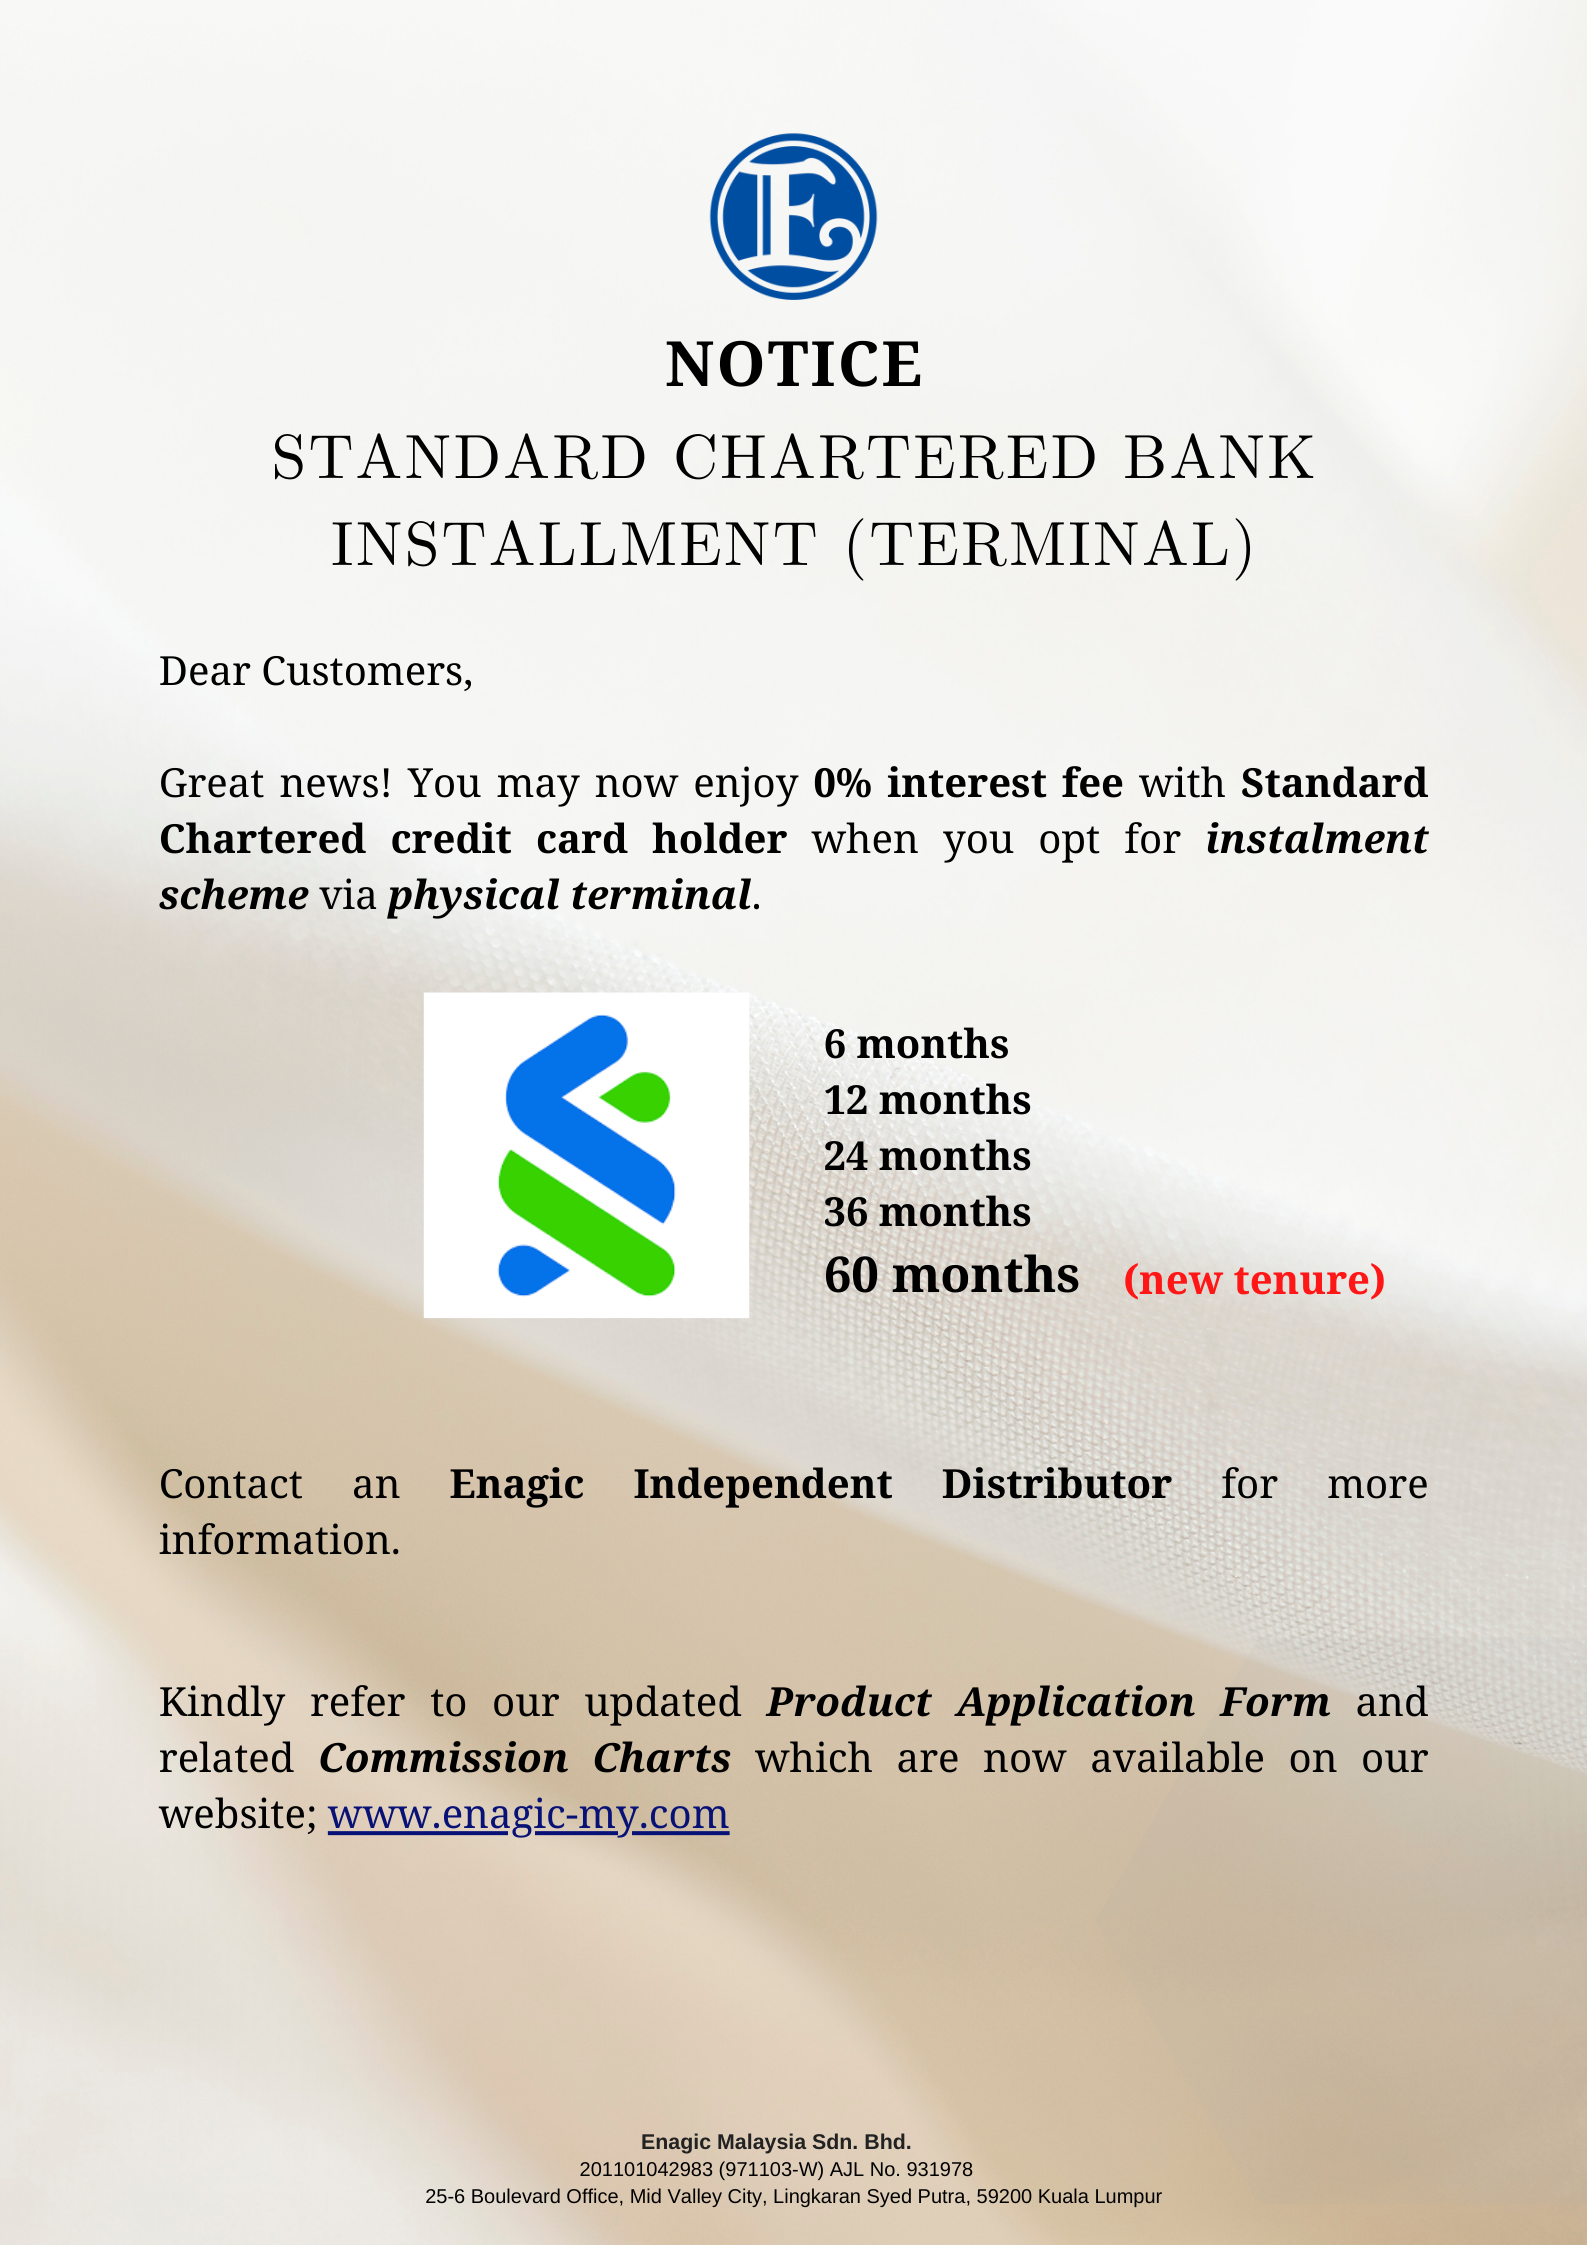 NOTICE | NEW Tenure For Standard Chartered Bank (60 Months)